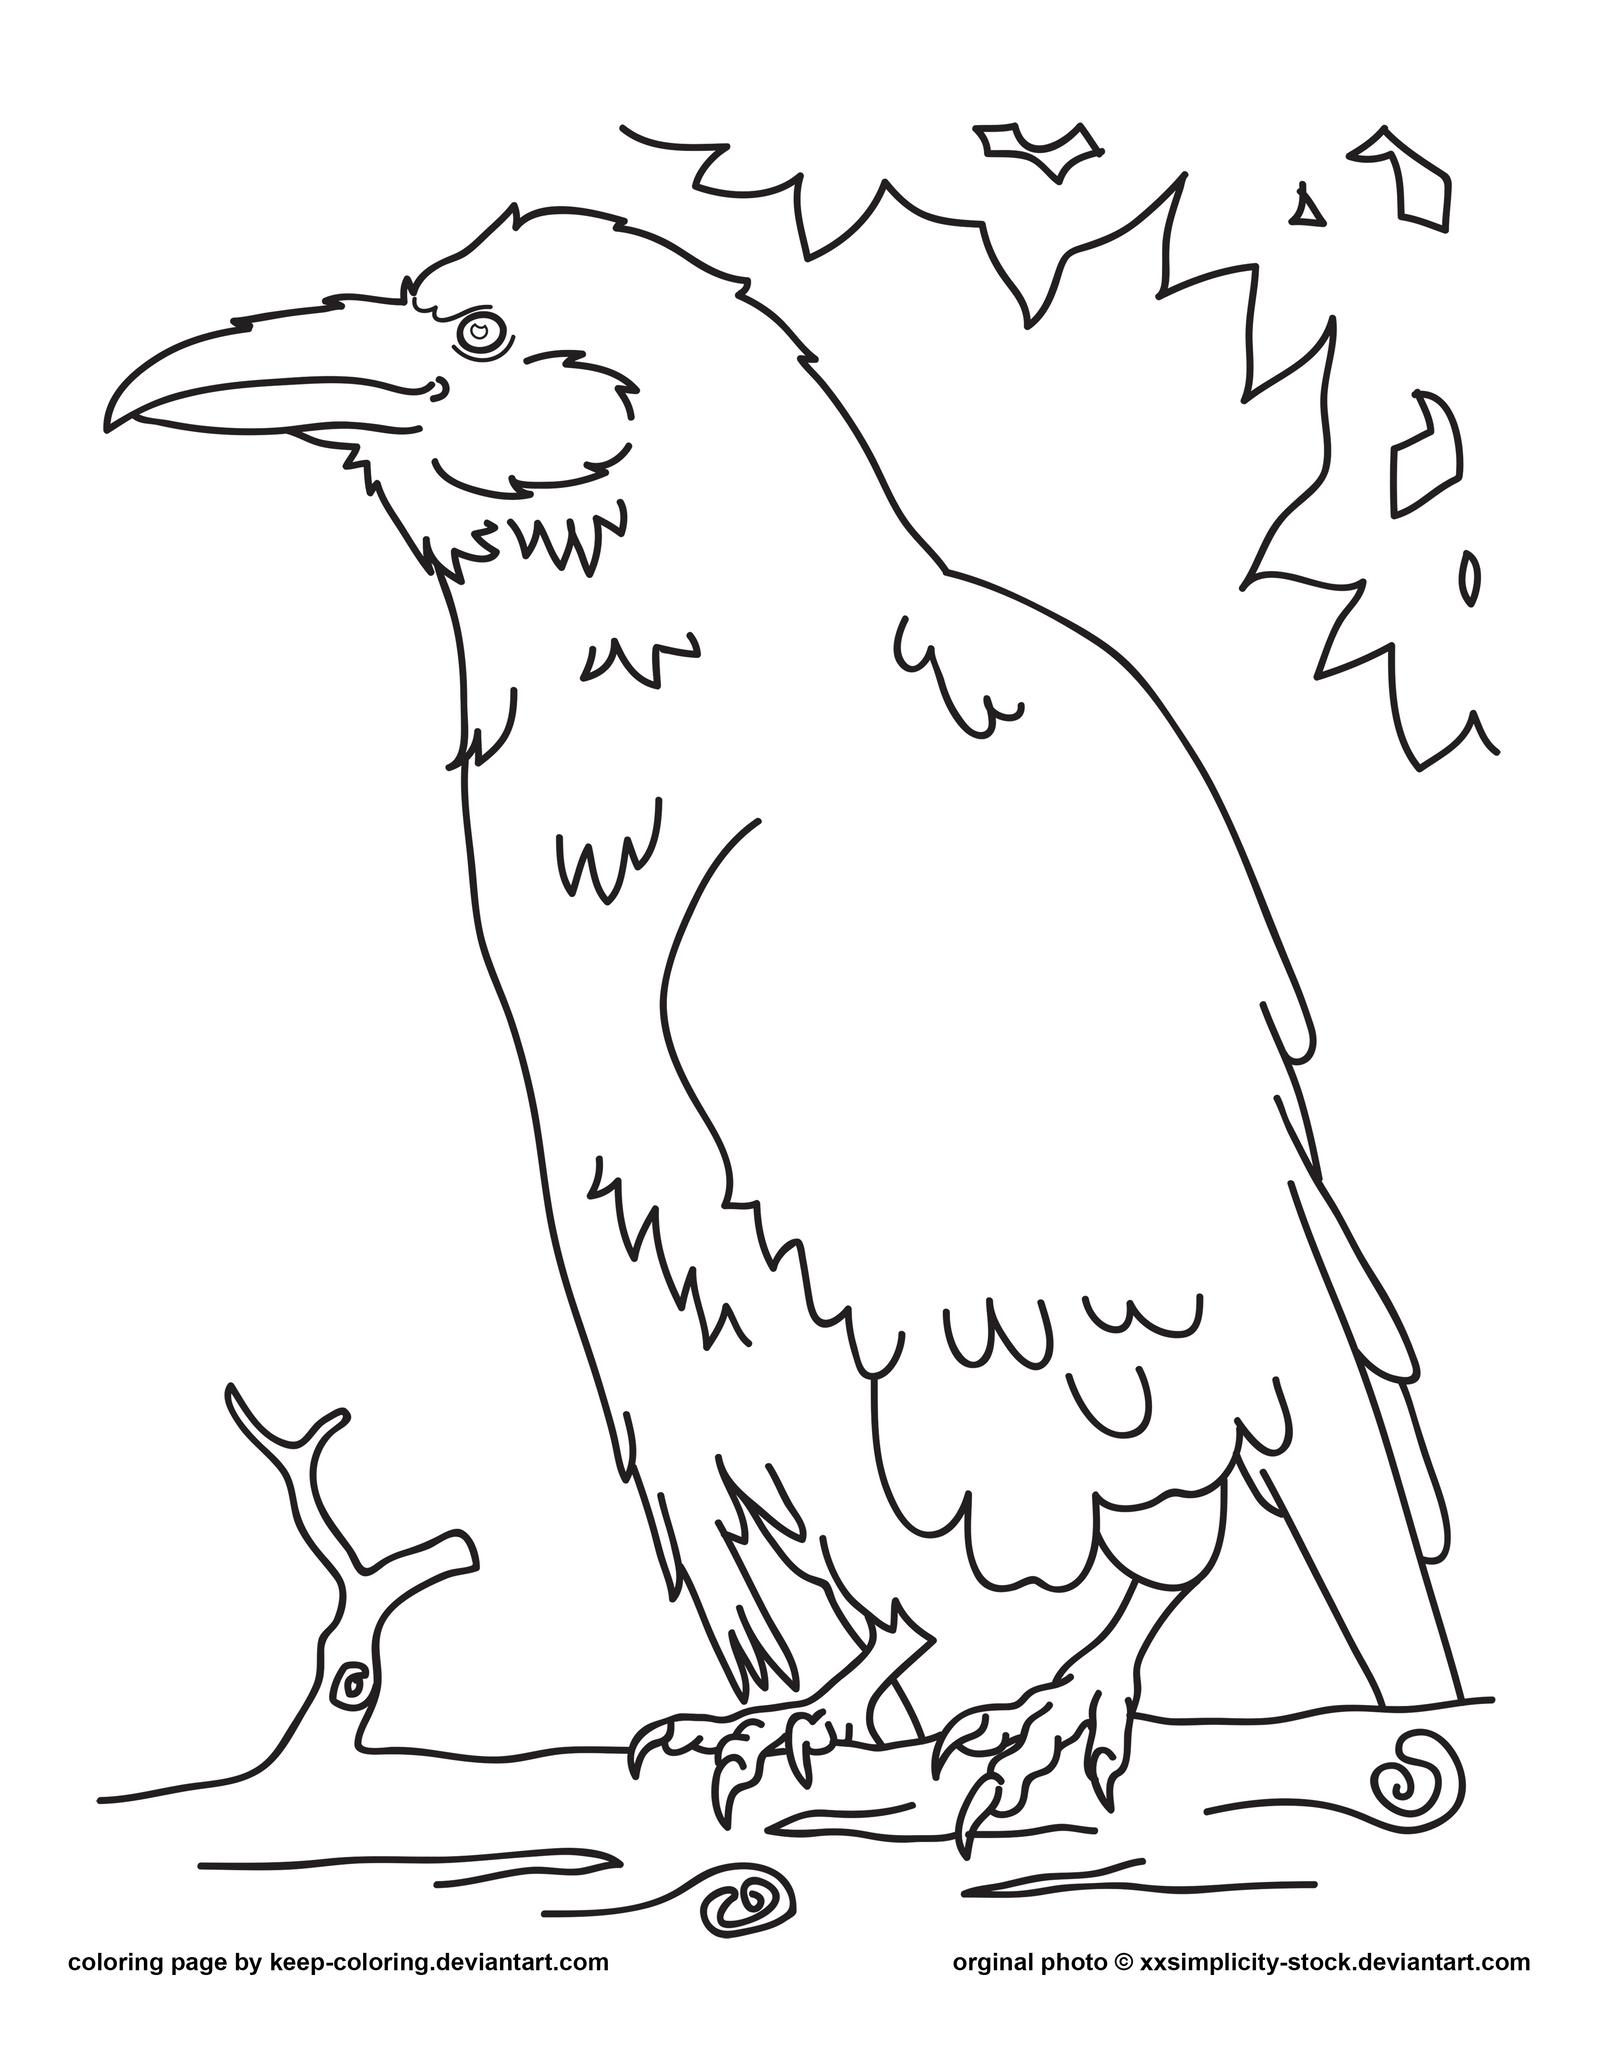 Perched raven coloring sheet by keep